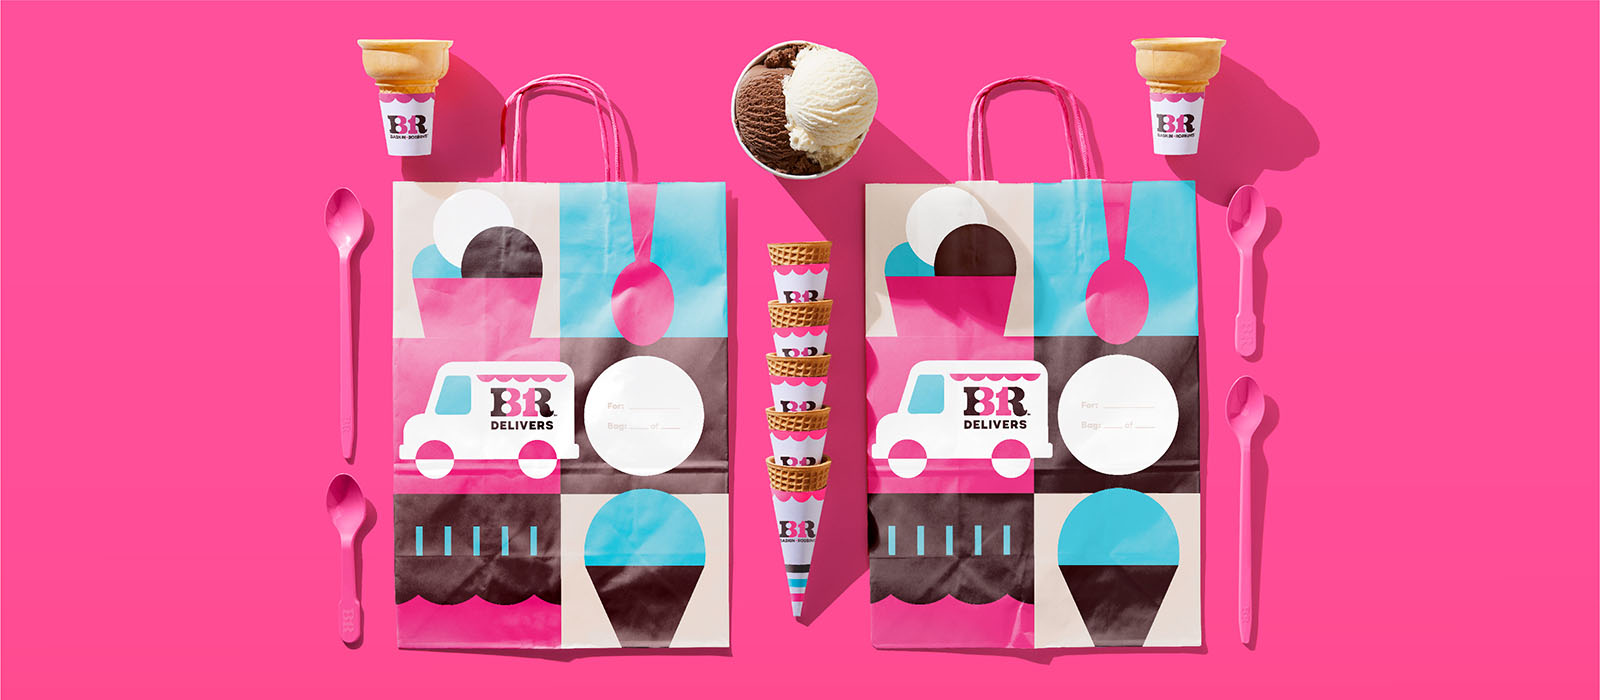 Baskin-Robbins cones, spoons, and takeout bags